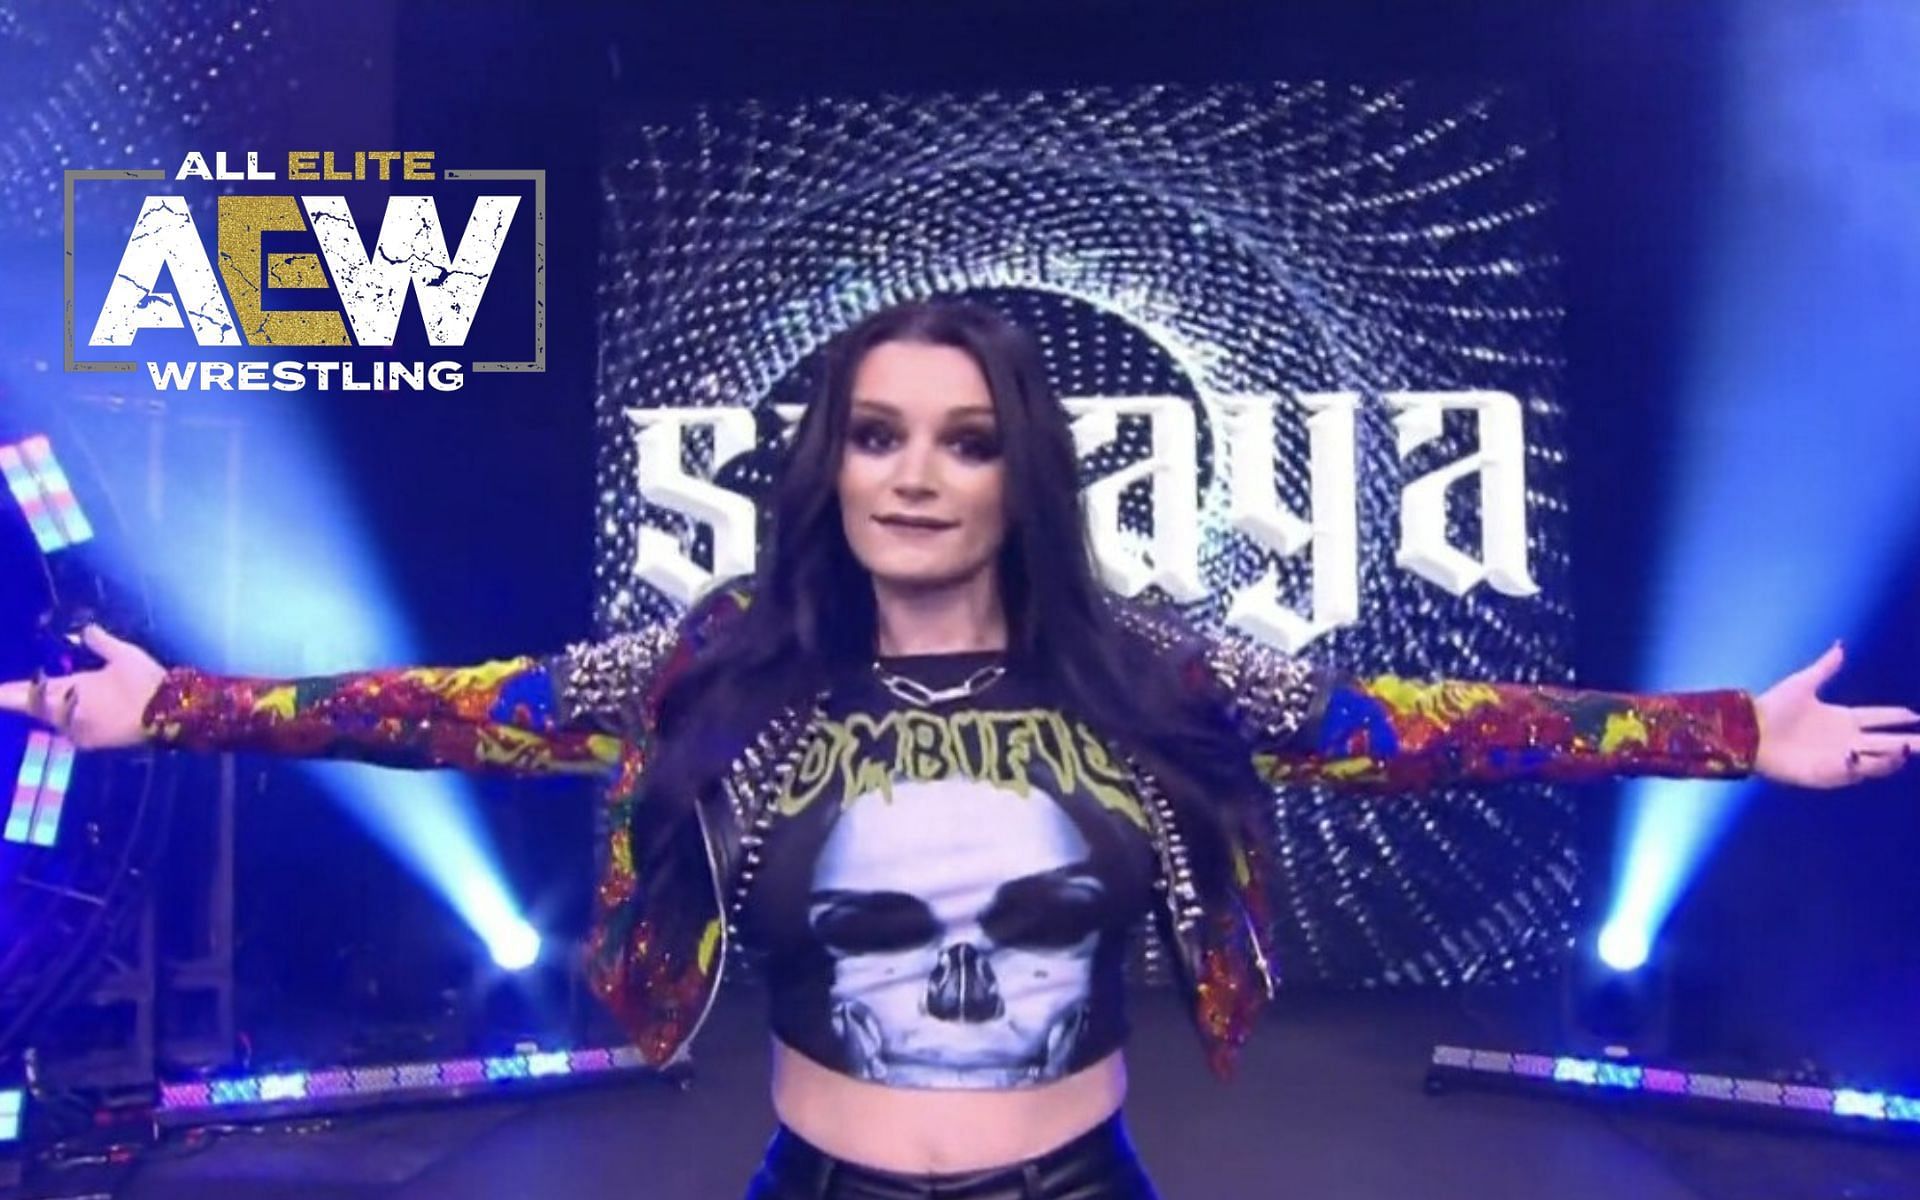 Saraya signed with AEW keeping a keen eye on the betterment of the women